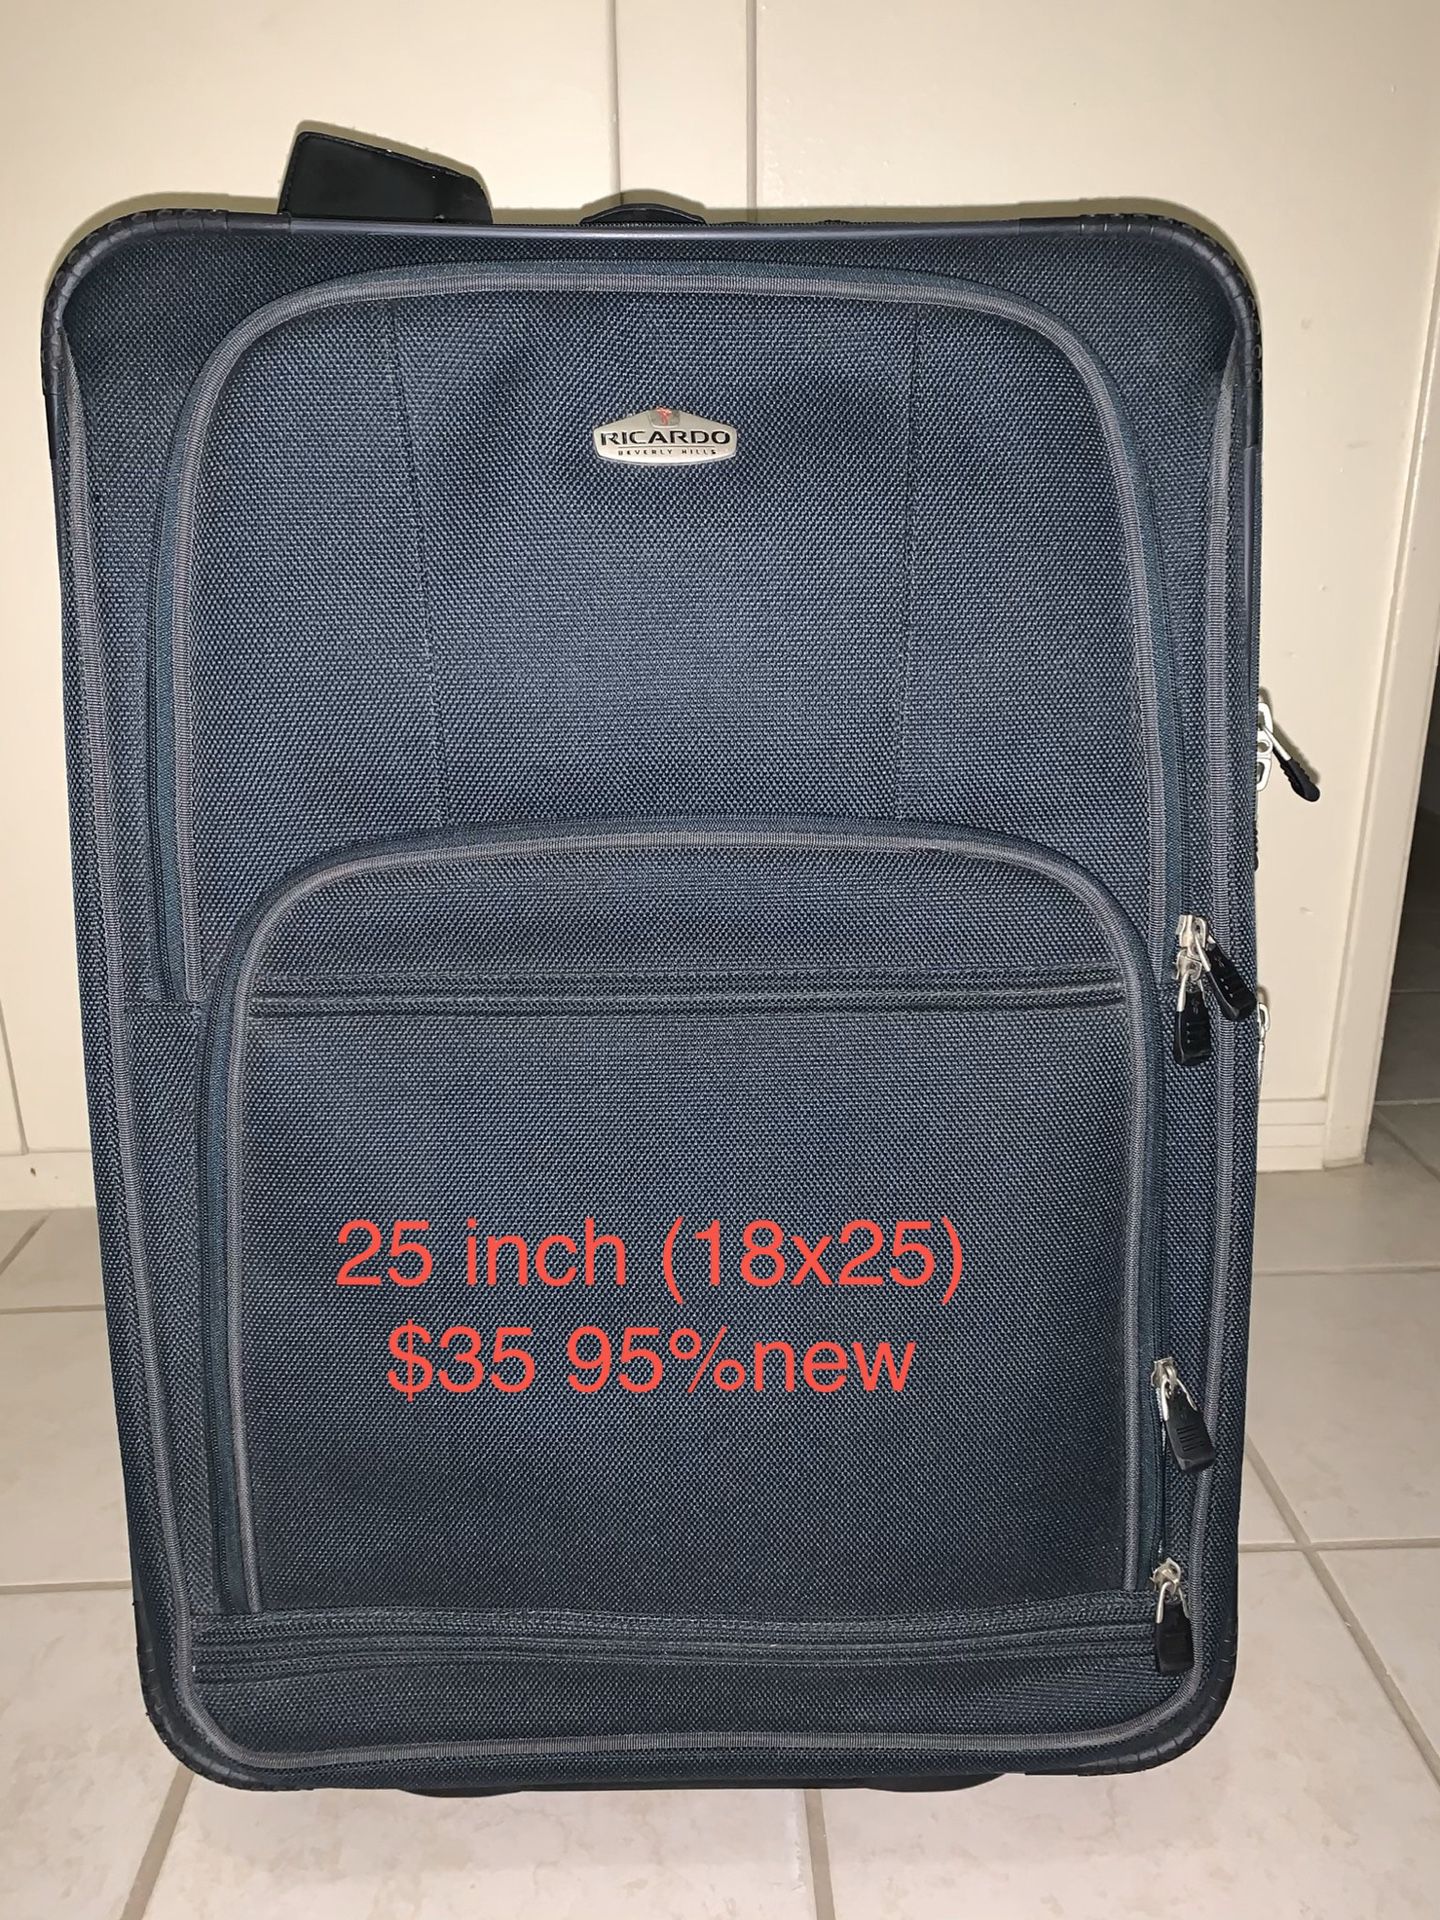 Ricardo luggage size 25 inch (18 x 25). 90 % new. Nothing wrong. Very clean. 35